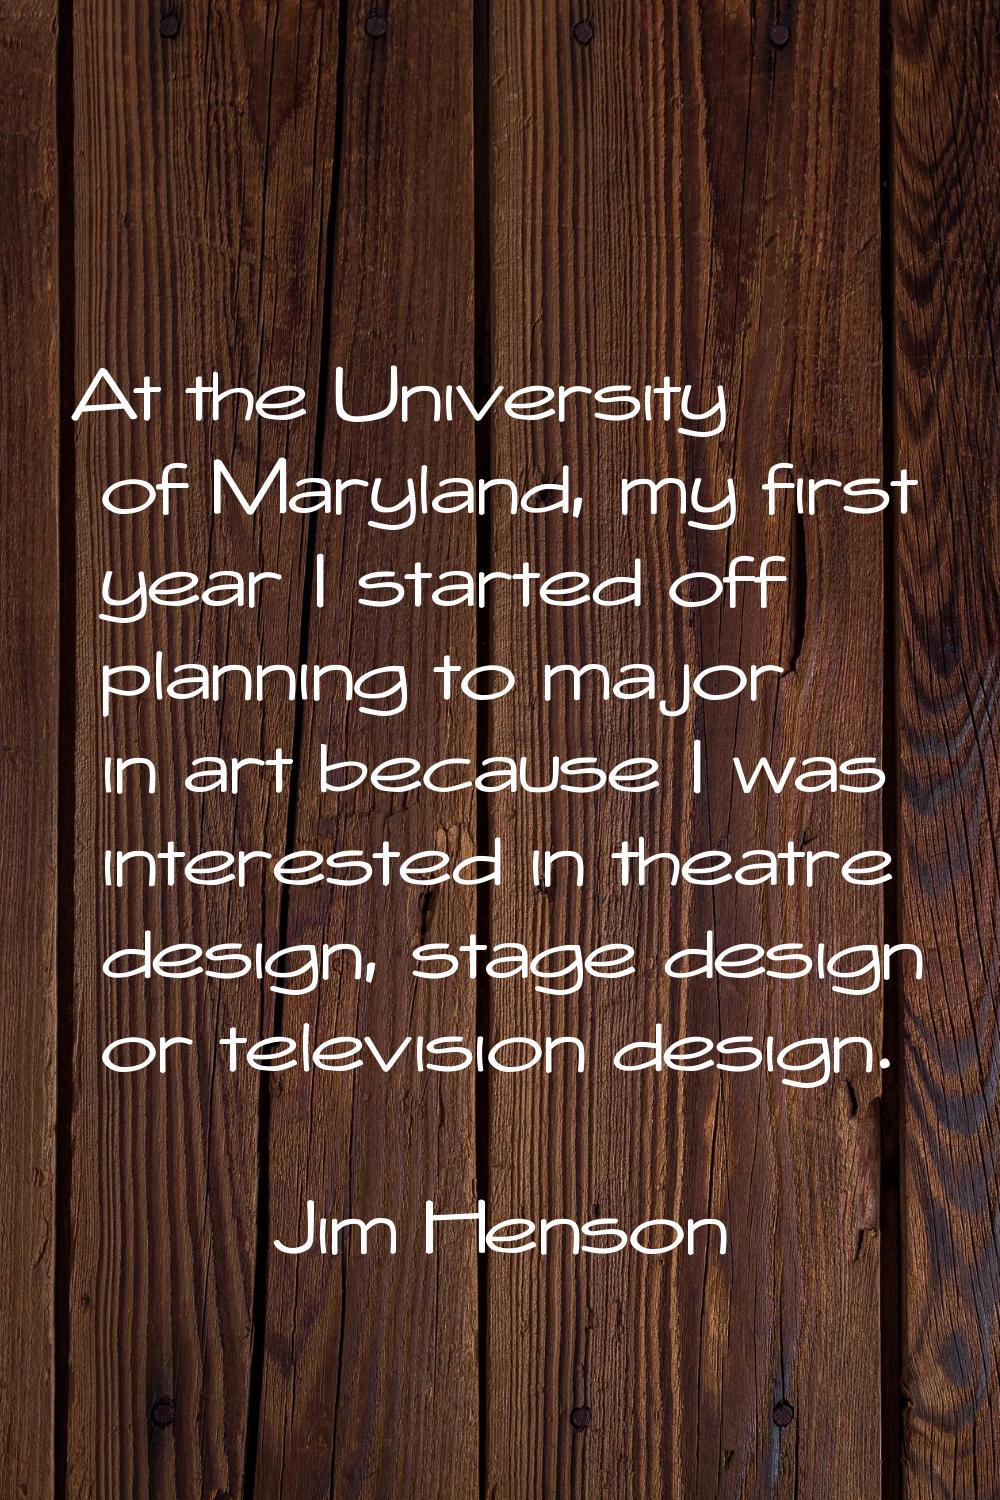 At the University of Maryland, my first year I started off planning to major in art because I was i